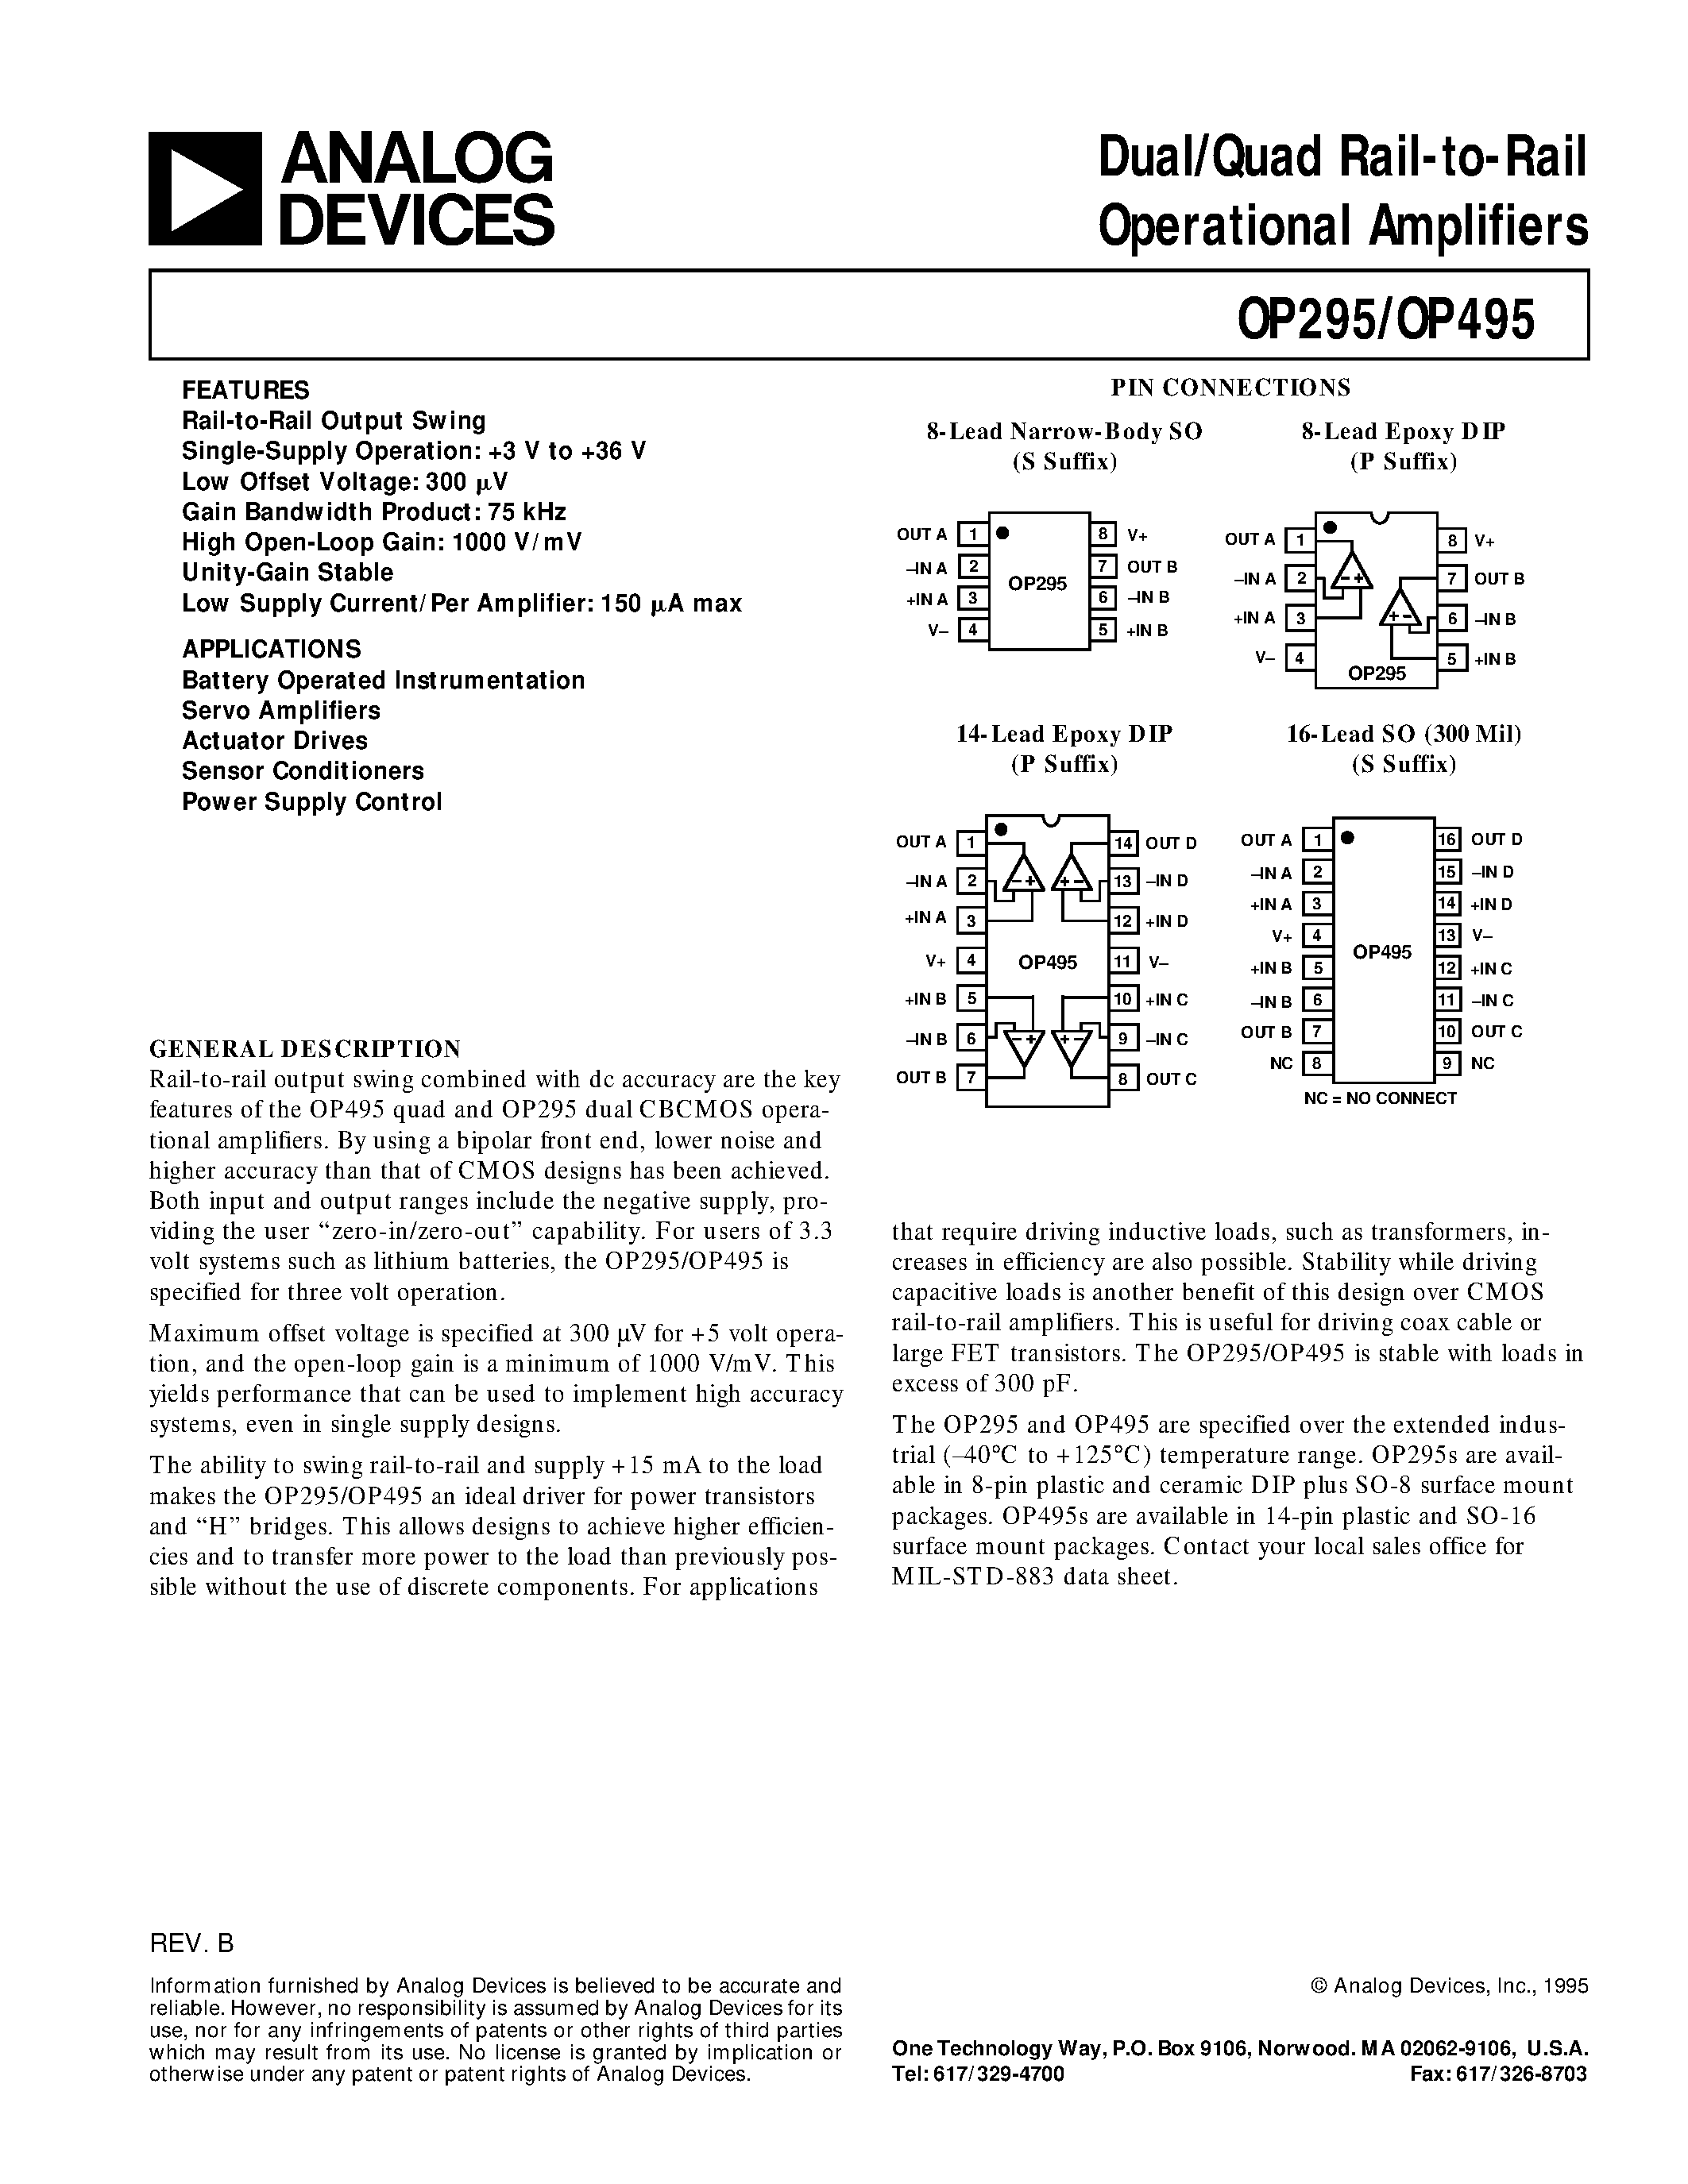 Datasheet OP295 - DUAL/QUAD RAIL-TO-RAIL OPERATIONAL AMPLIFIERS page 1